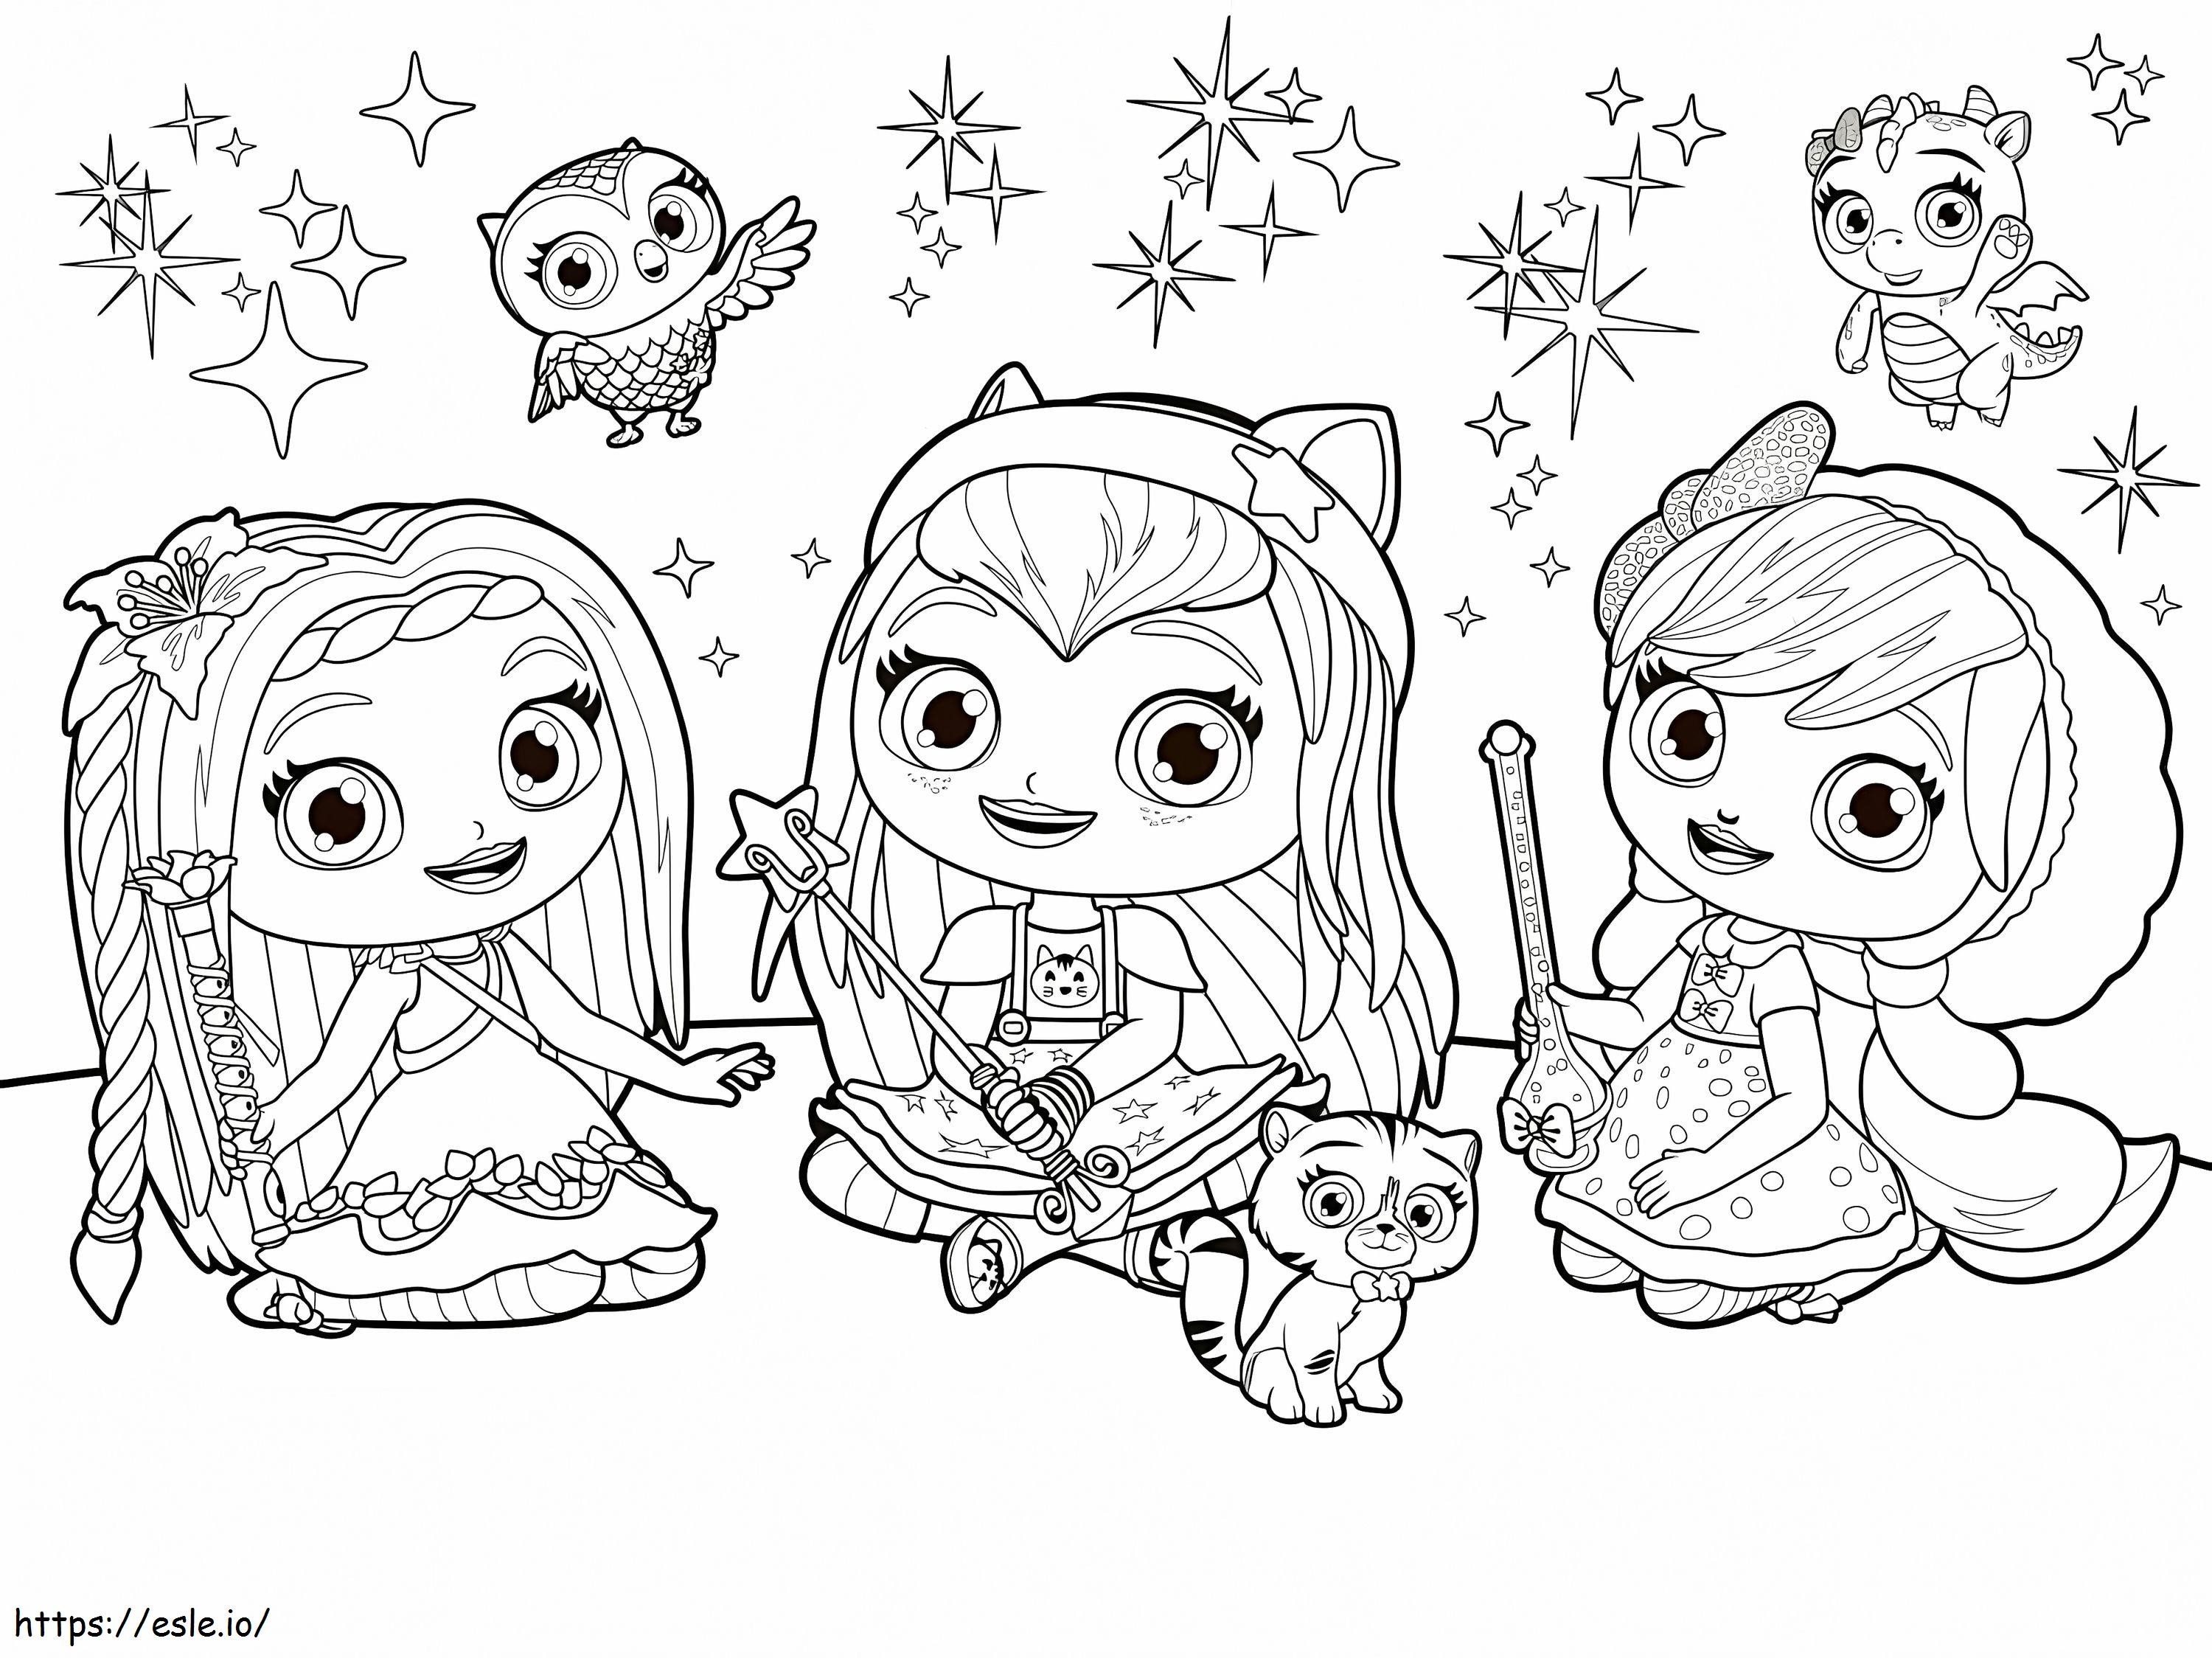 Characters From Little Charmers coloring page